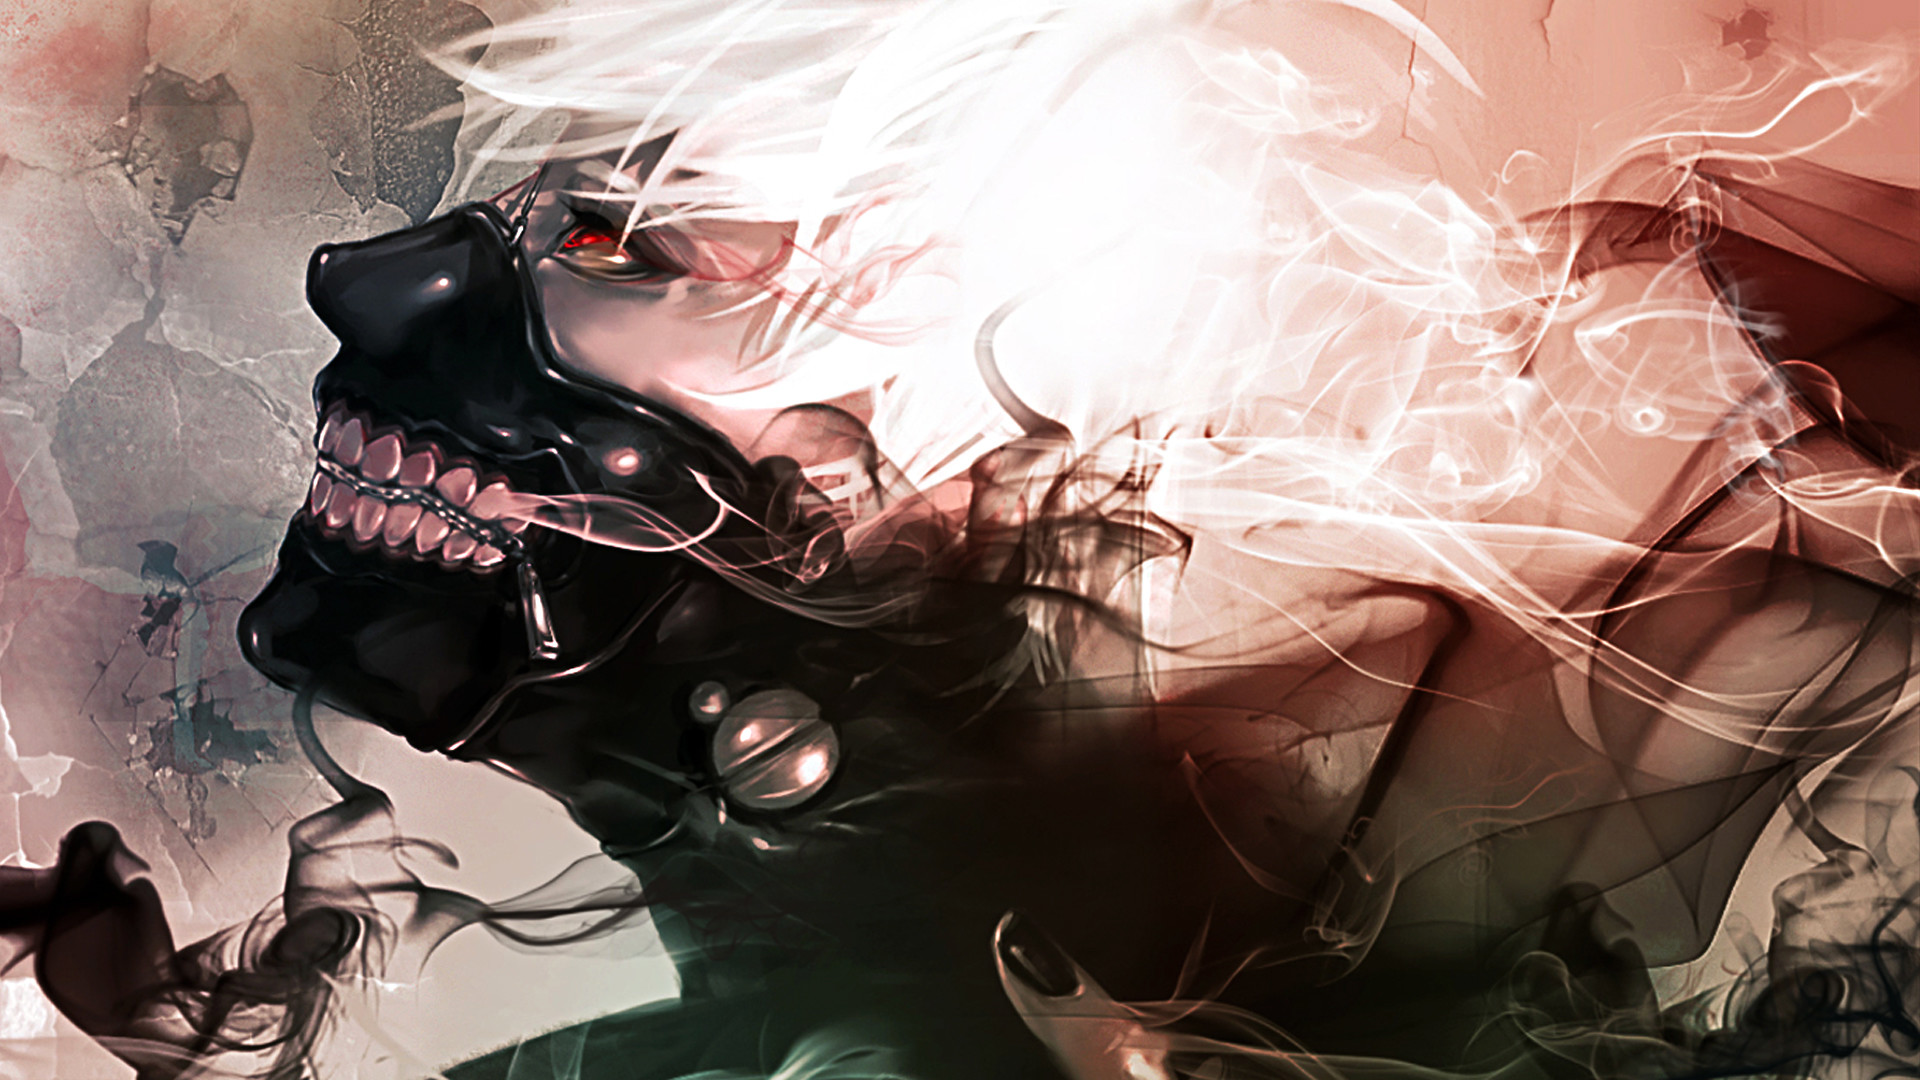 1920x1080 currently viewing Tokyo Ghoul Wallpaper . Download this Full HD (High .